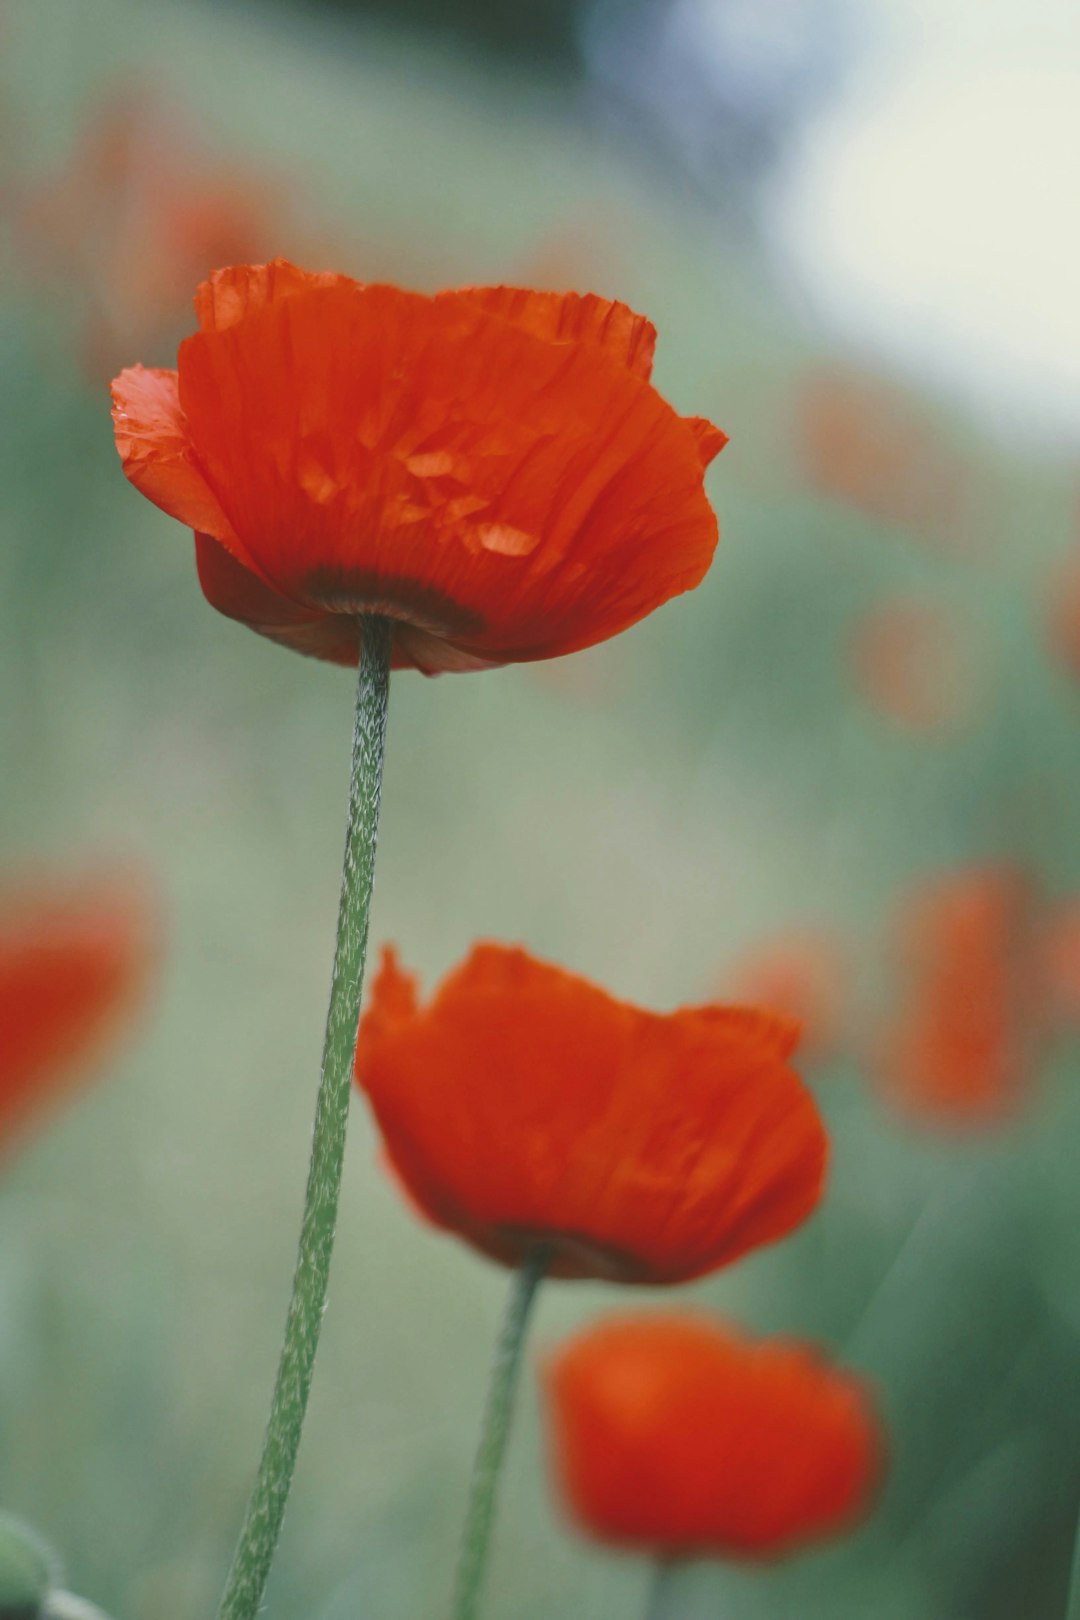 red poppy in bloom during daytime